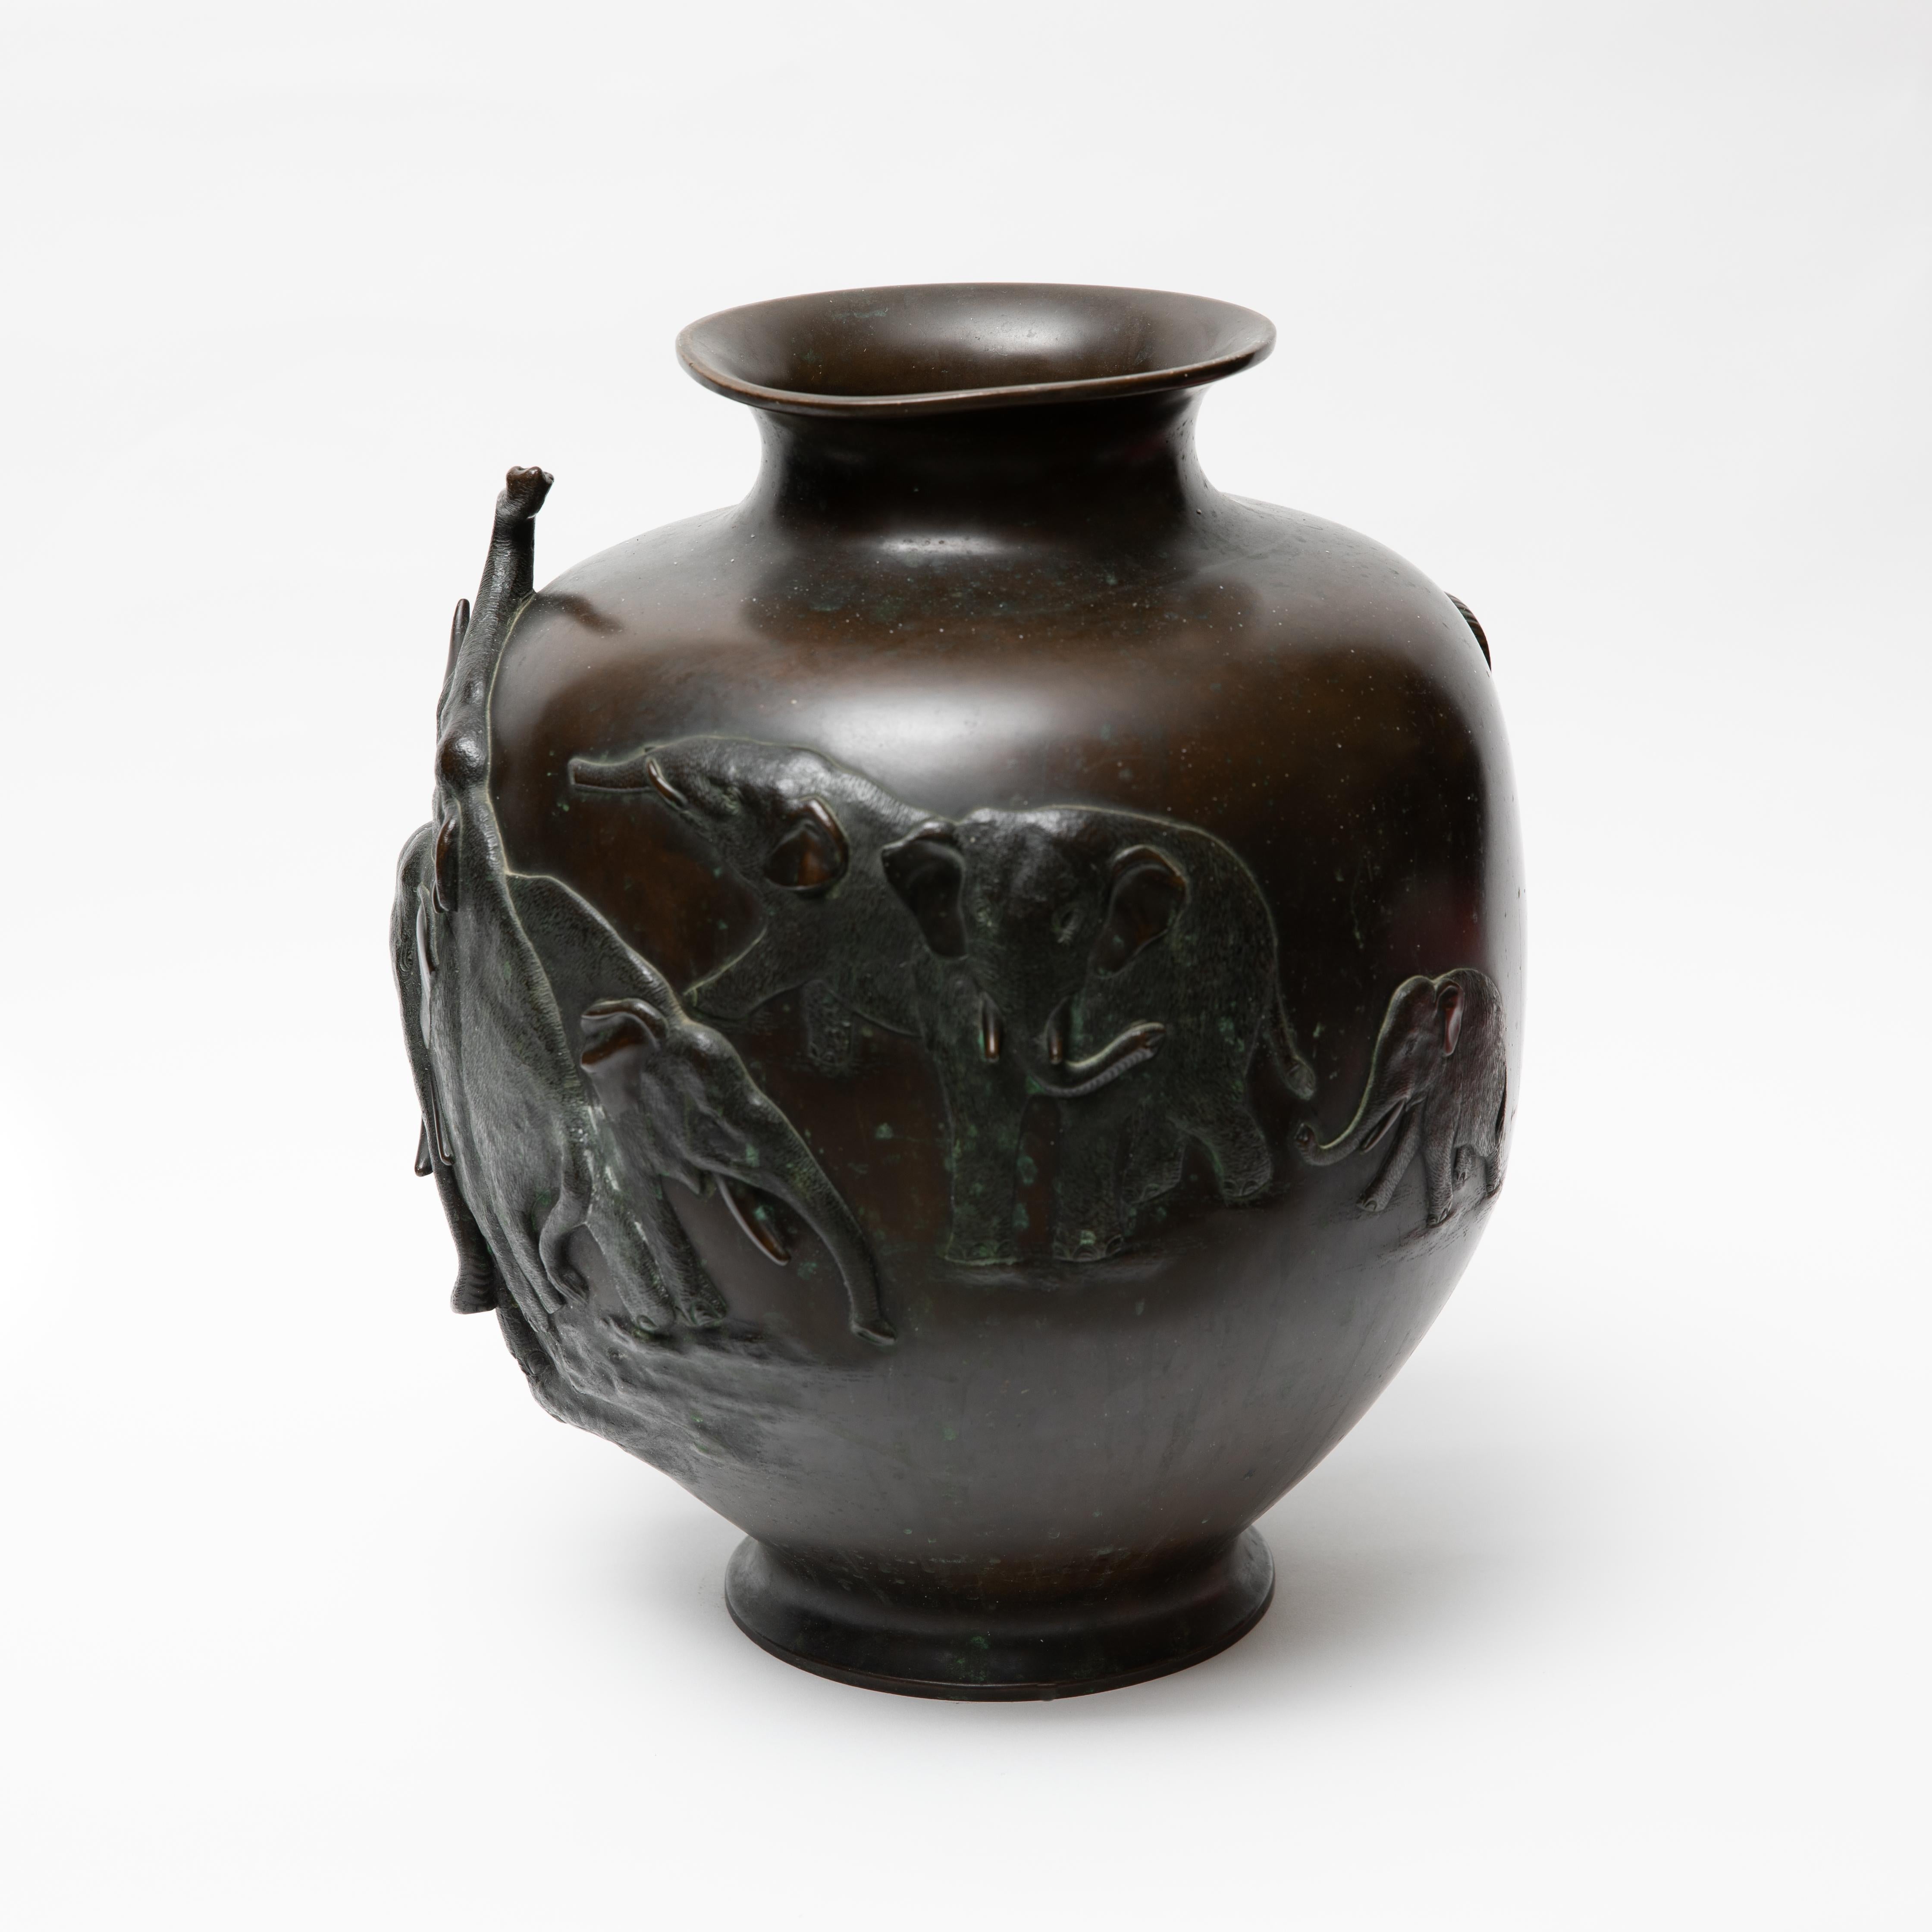 Meiji Japanese bronze baluster jar with elephant motif. Cast in relief with continuous frieze of elephants, the base with six-character maker marks. Measures: Approximate height 15 1/4